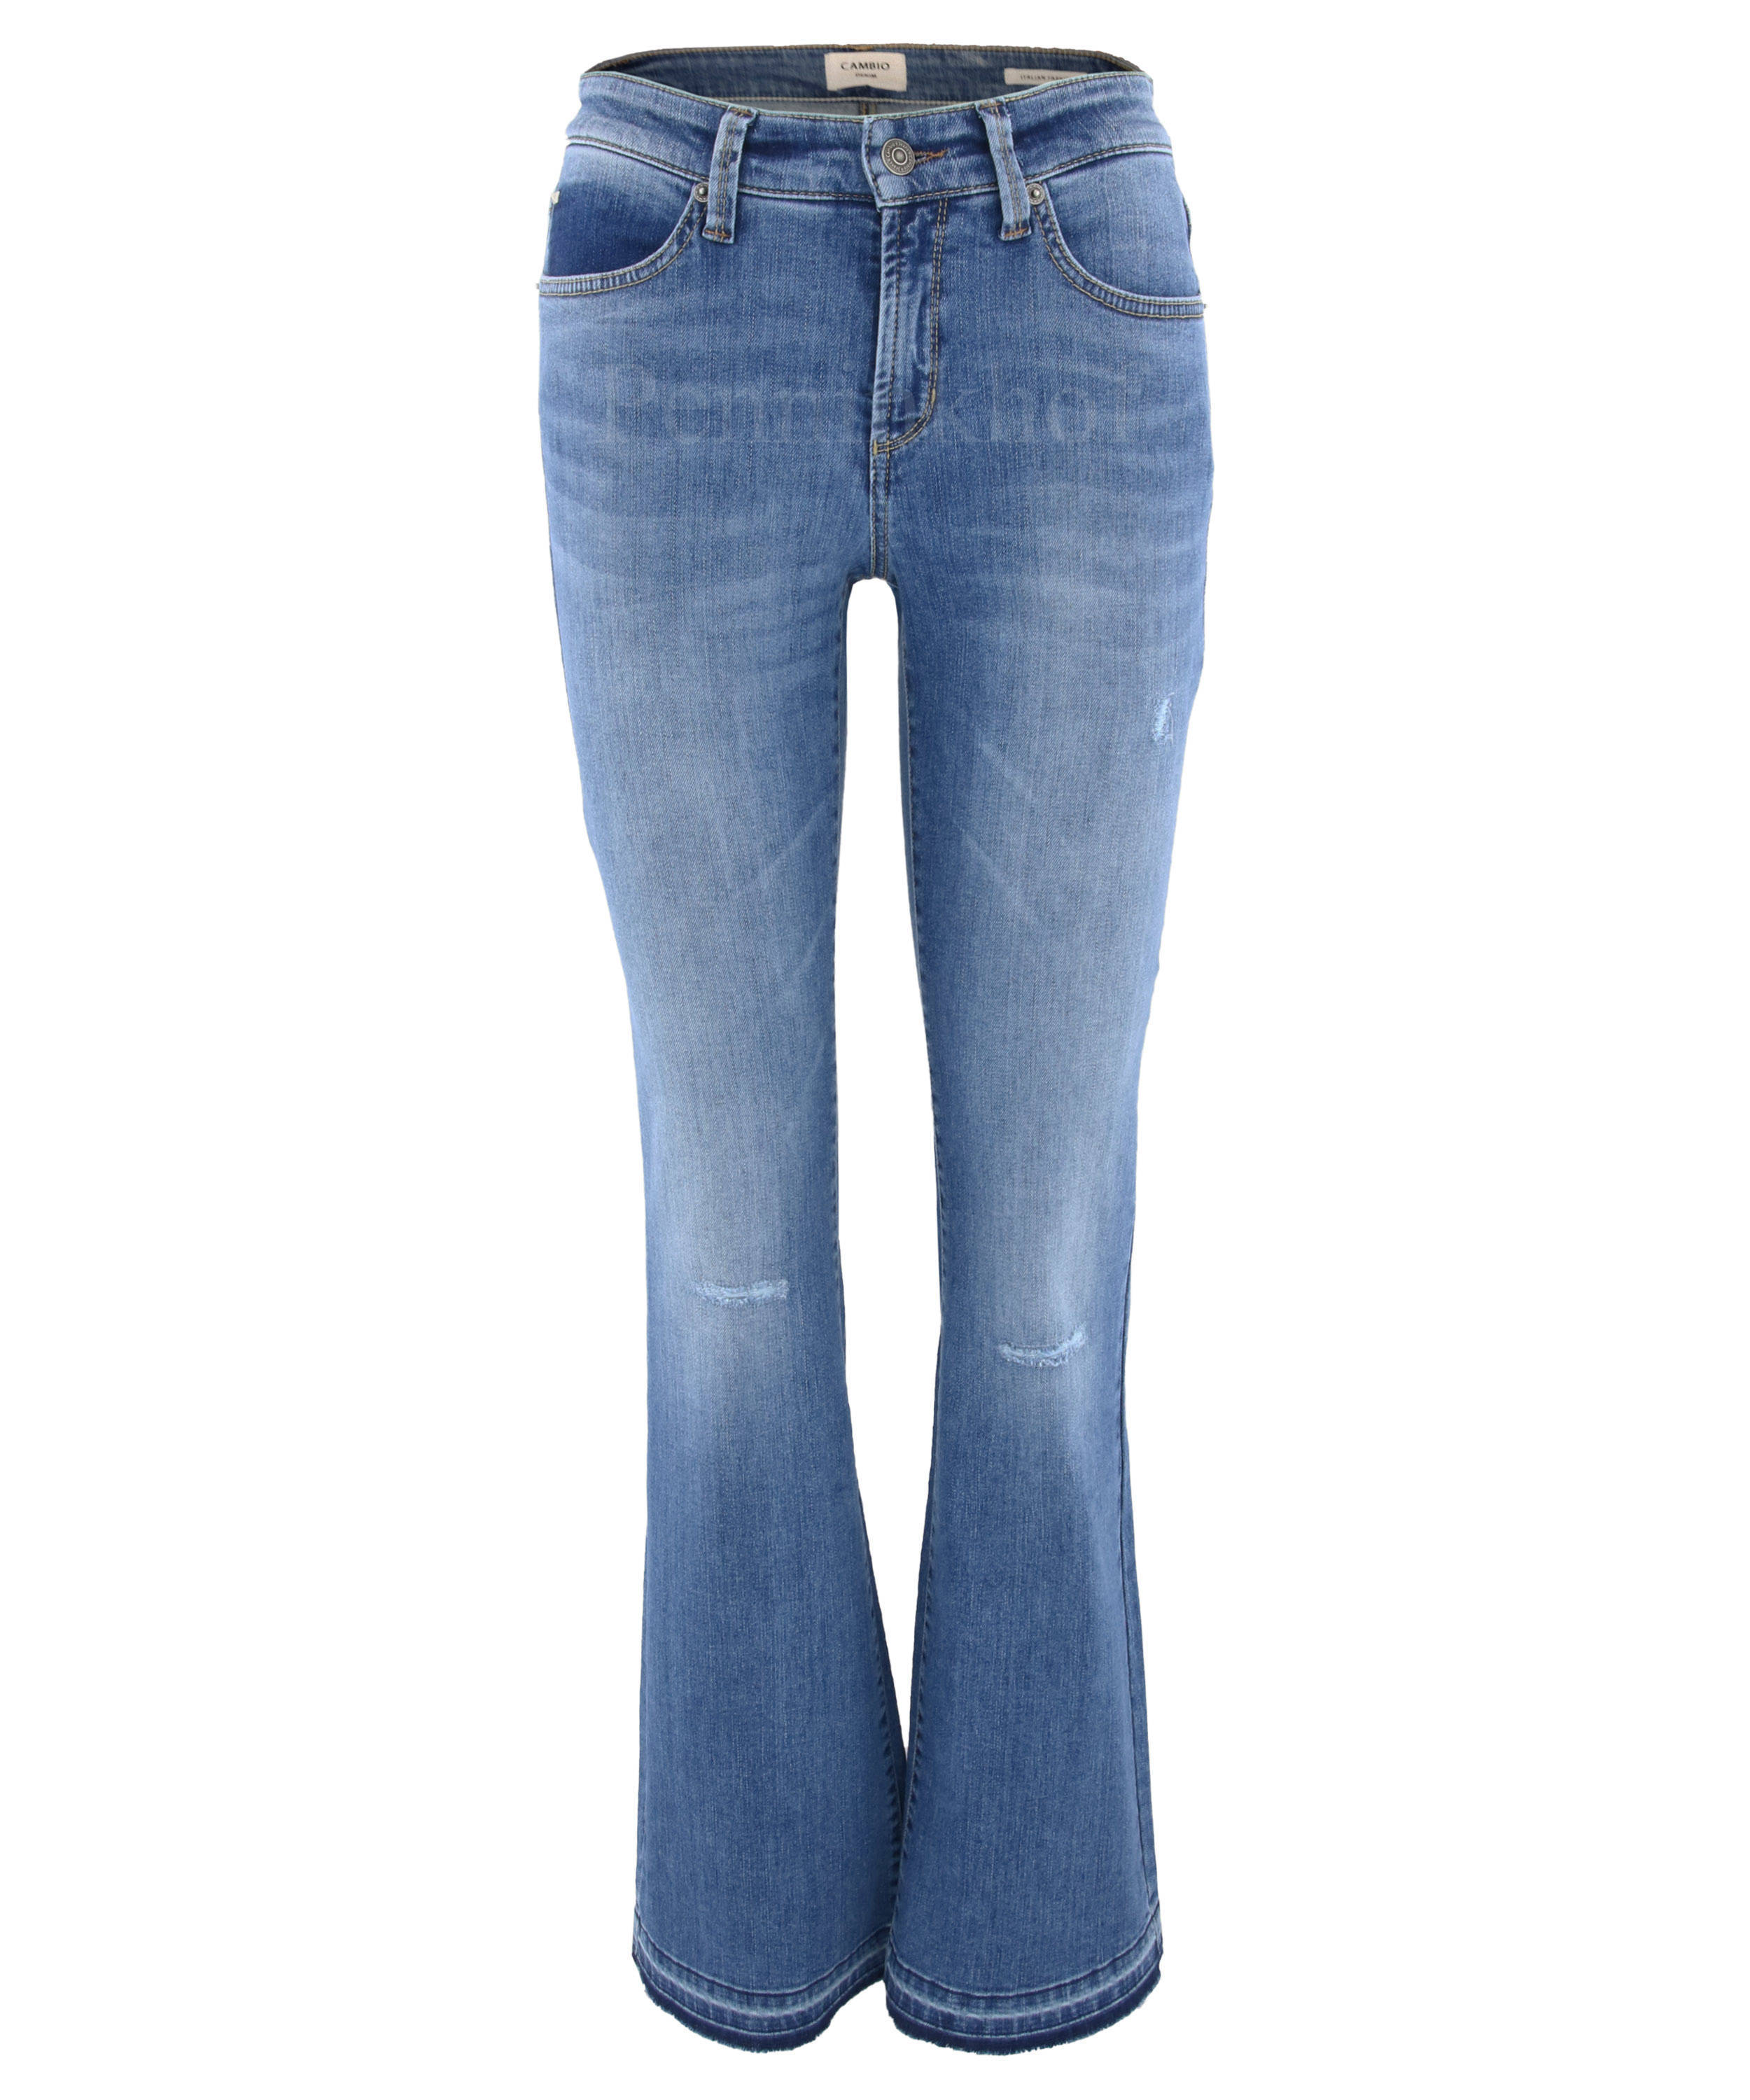 Cambio trousers PARIS FLARED 9128 0012-08 Blue by Penninkhoffashion.com